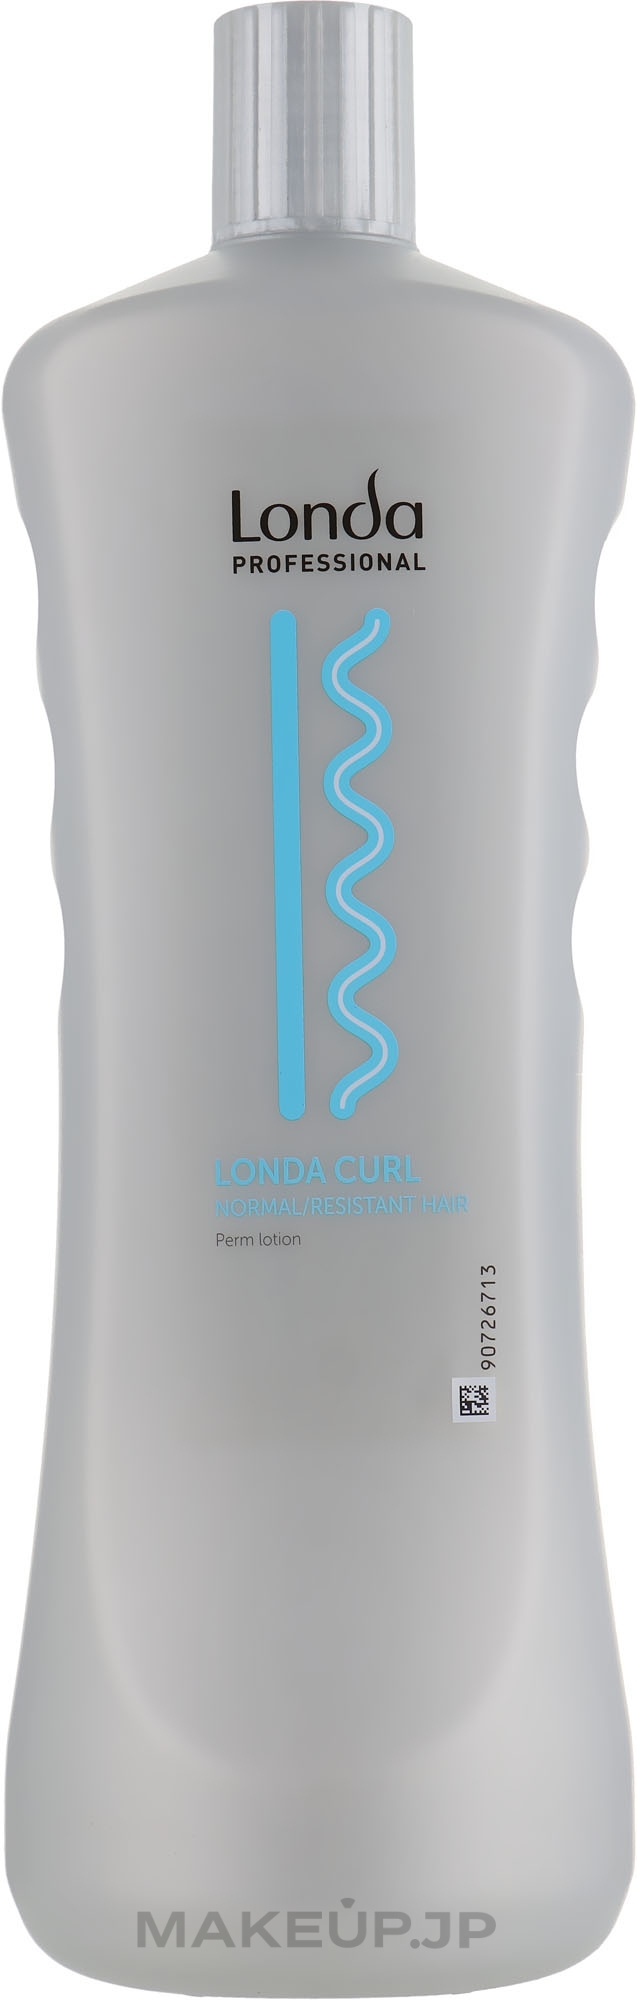 Perm Lotion for Normal & Unruly Hair - Londa Professional Londawave Curl N/R Perm Lotion — photo 1000 ml